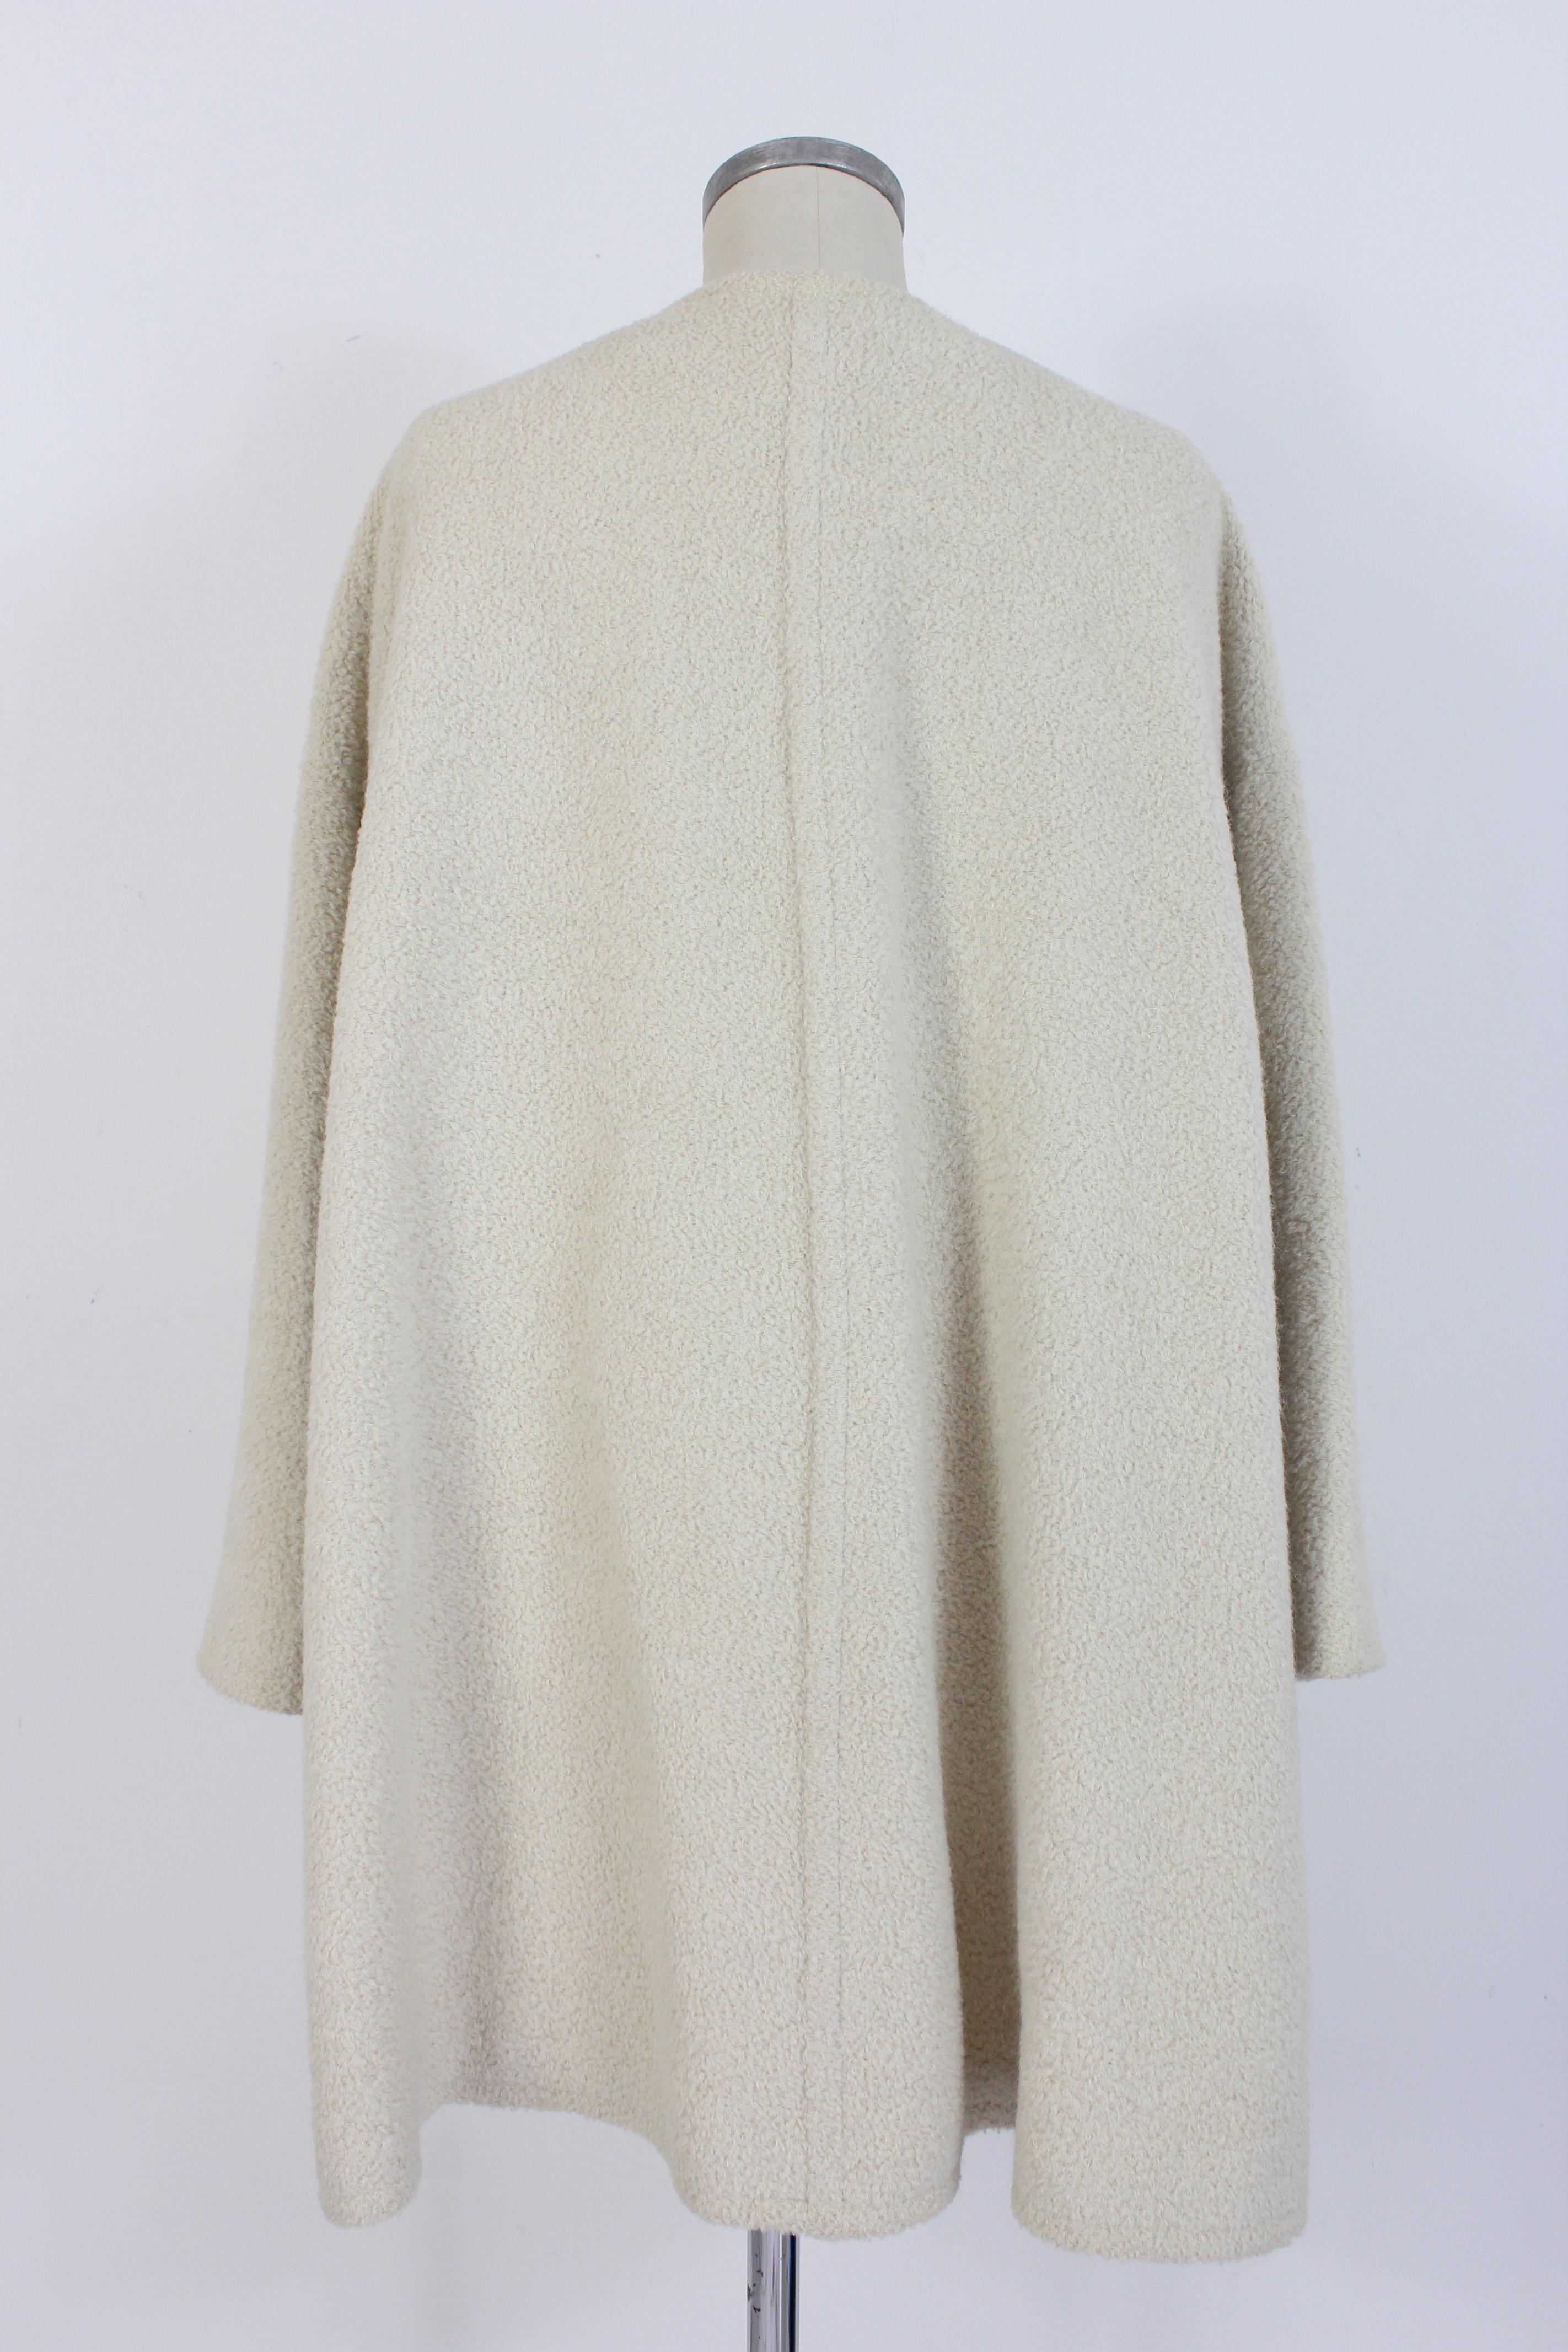 Genny vintage 80s women's coat. Short cape model, without buttons, beige color, in bouclé. Fabric 51% alpaca, 49% wool, internally lined. Made in Italy.

Condition: Excellent

Item used a few times, remains in excellent condition. There are no